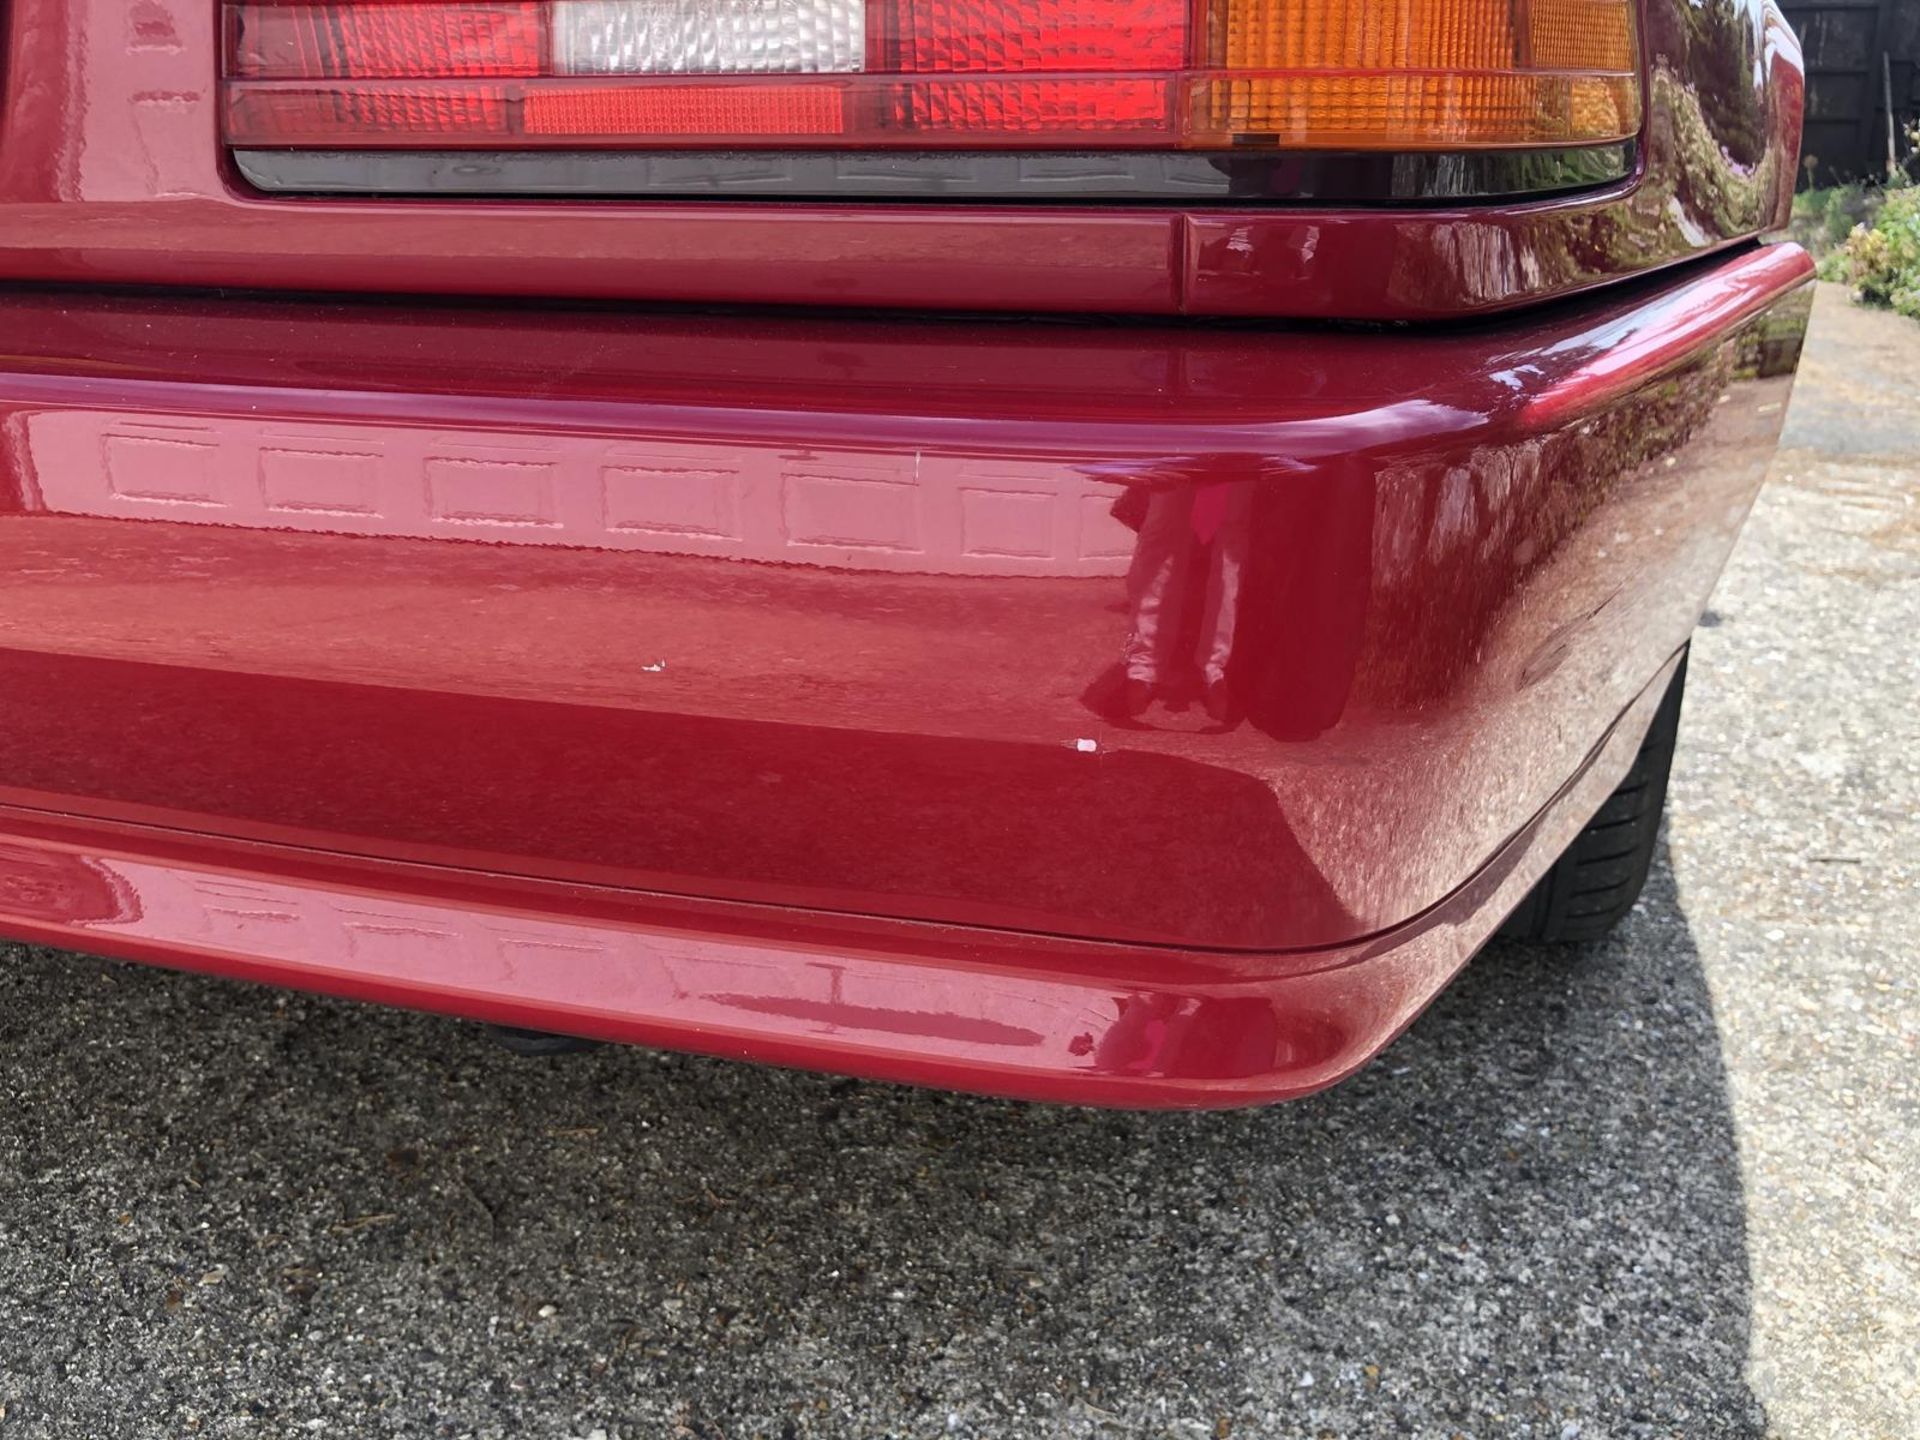 A 1995 Mercedes-Benz 280SL Registration number M642 TMG V5C MOT expires February 2021 Red with a - Image 17 of 106